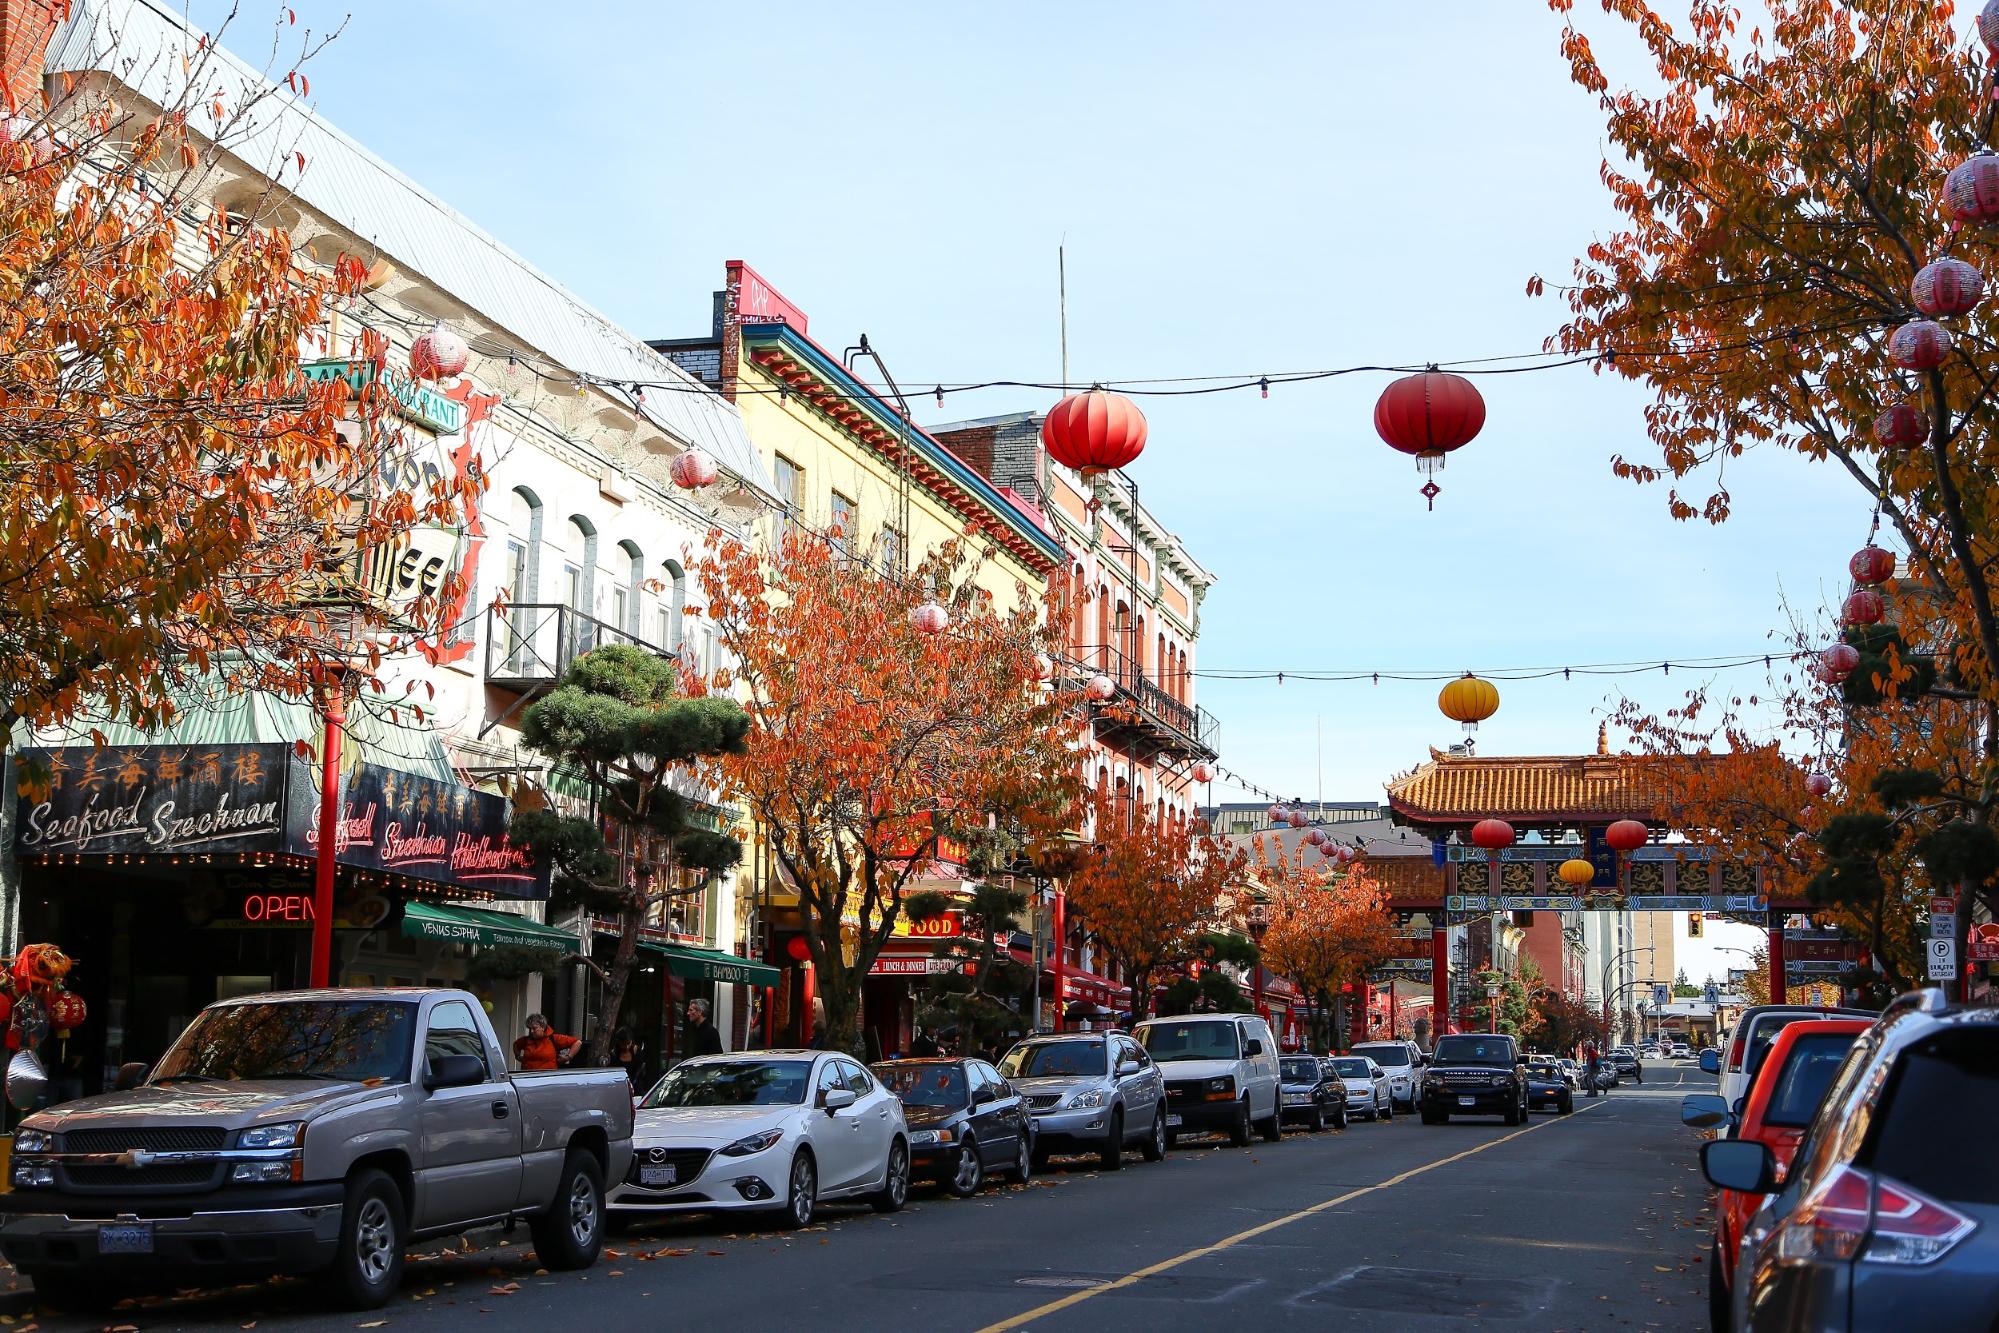 Colourful Chinese lantern strung across a city street.